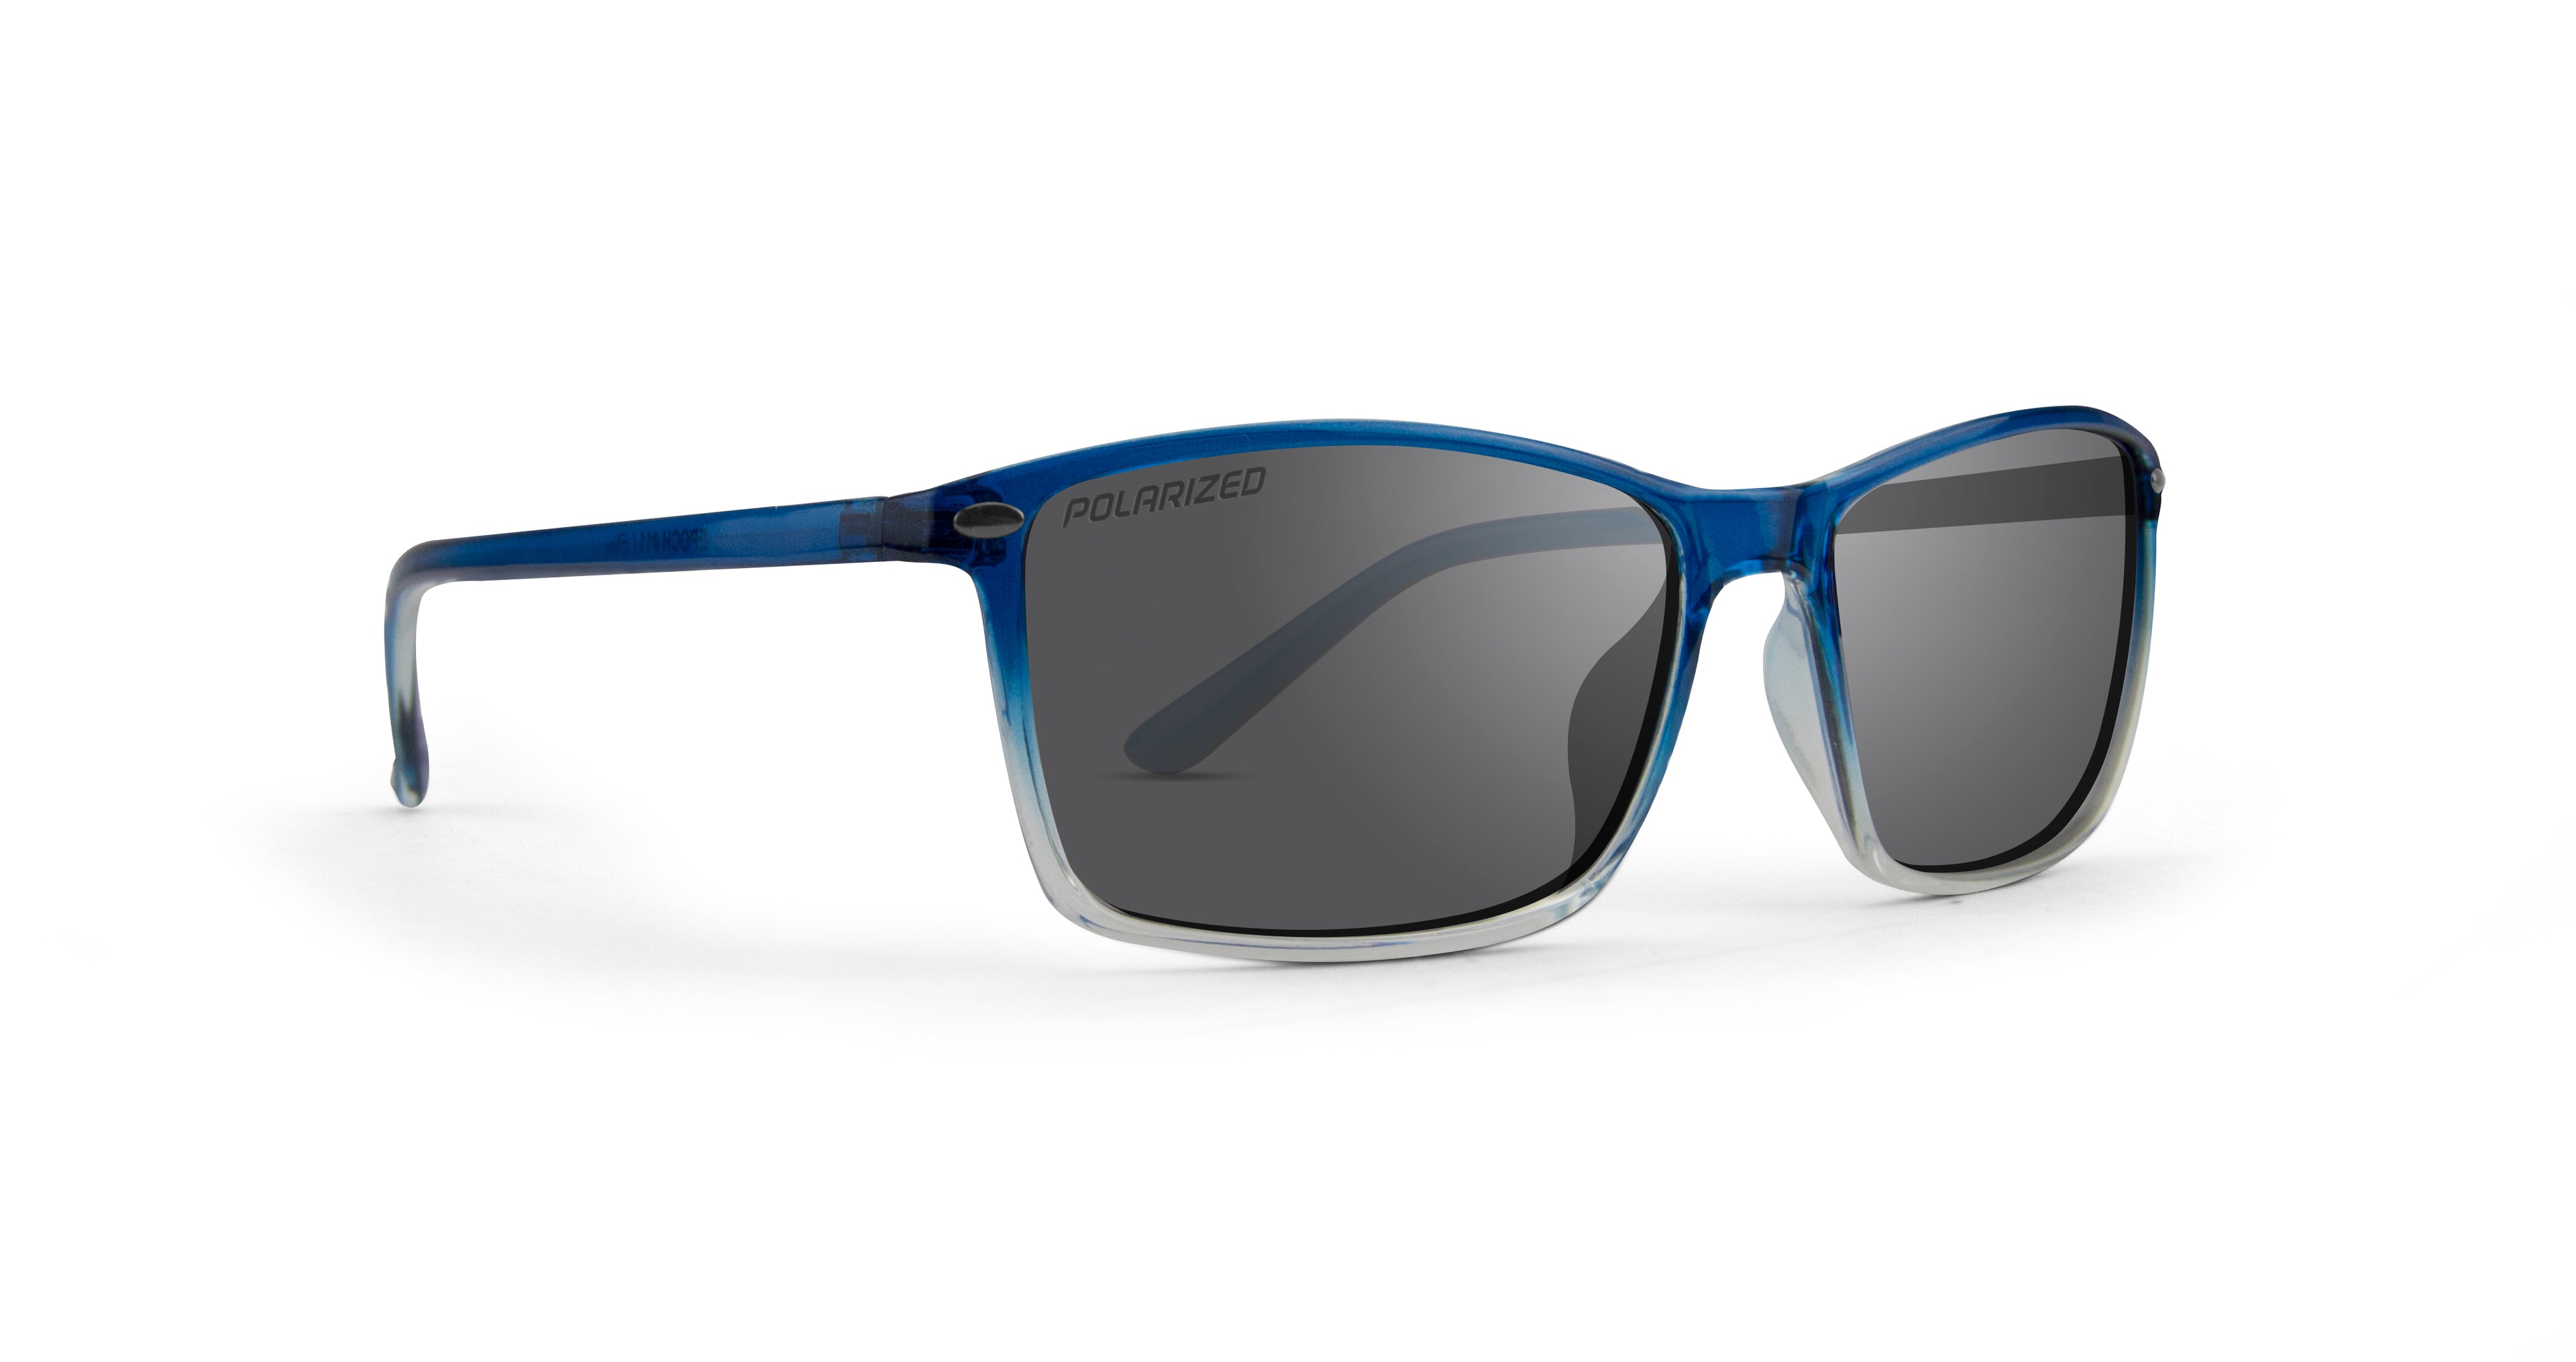 Murphy Sunglasses with navy faded frame and polarized smoke lenses by Epoch Eyewear